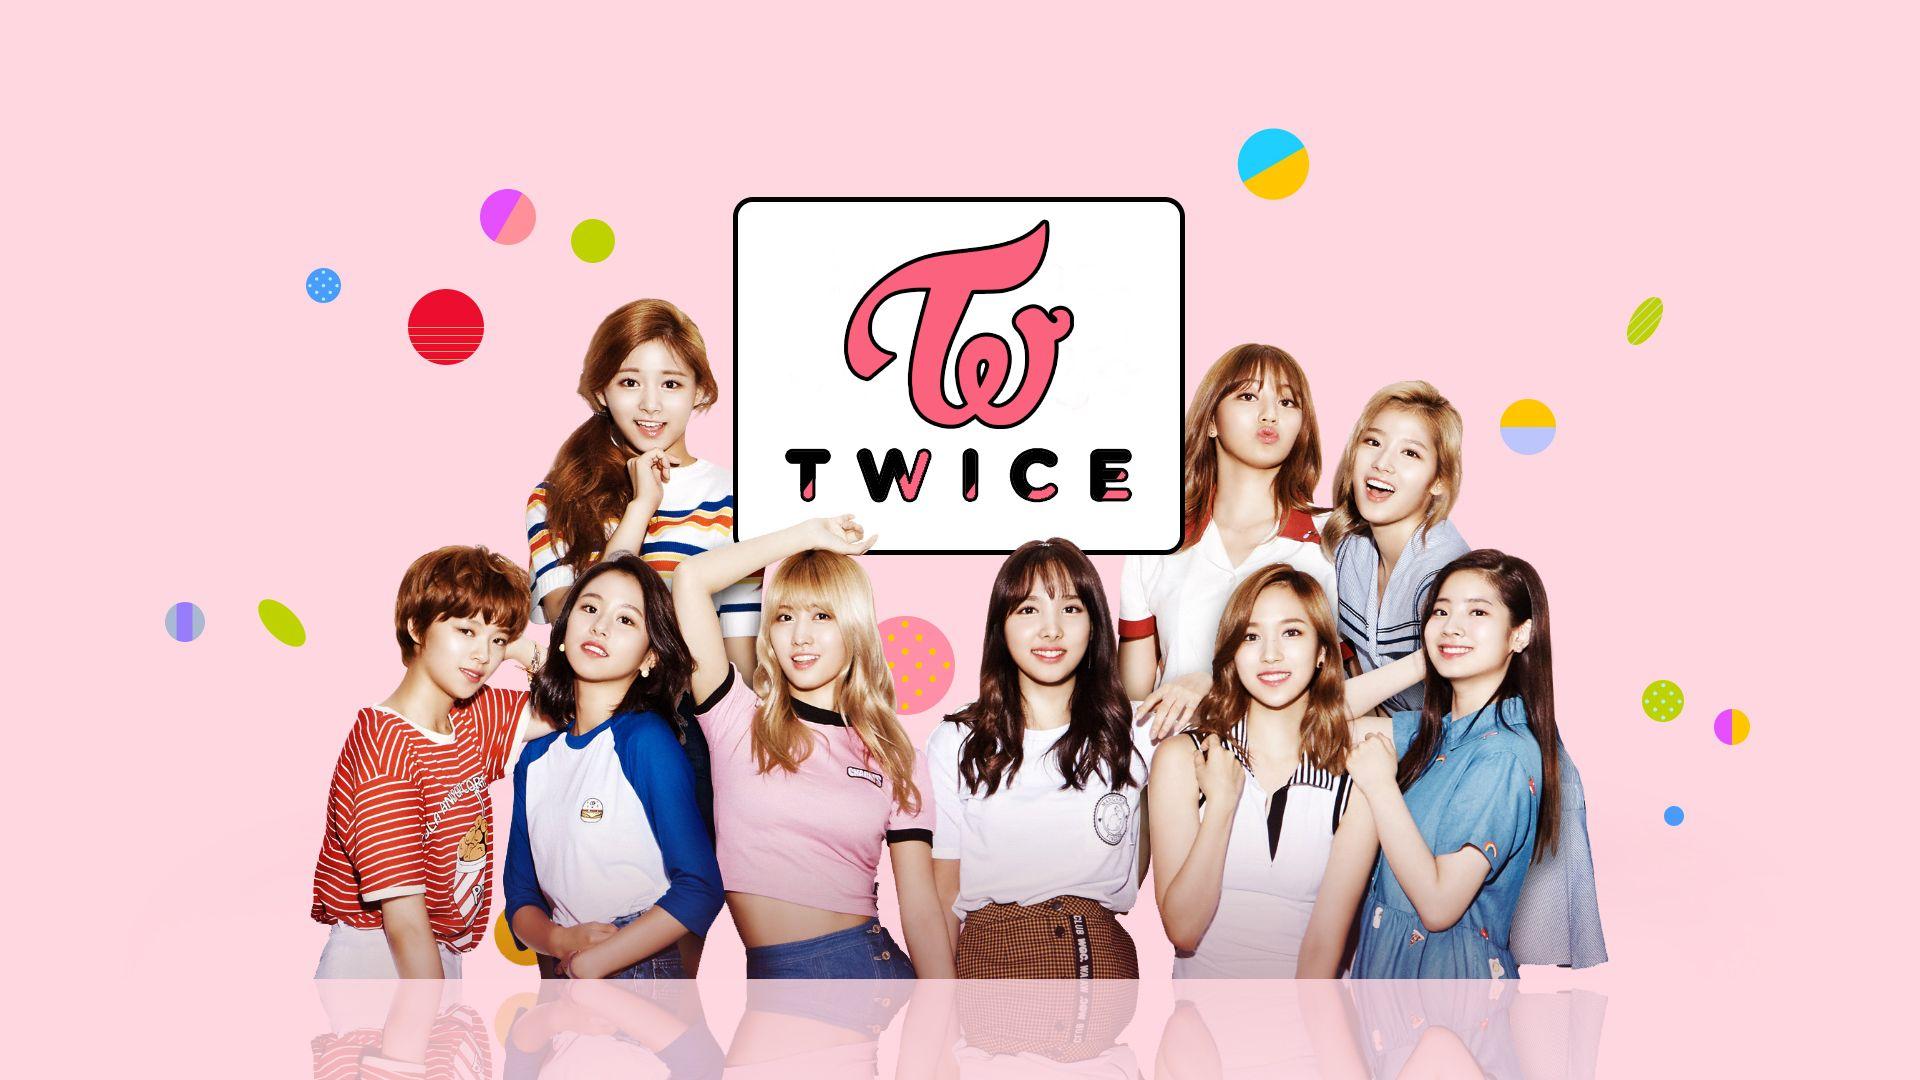 Twice Logo Wallpapers - Wallpaper Cave